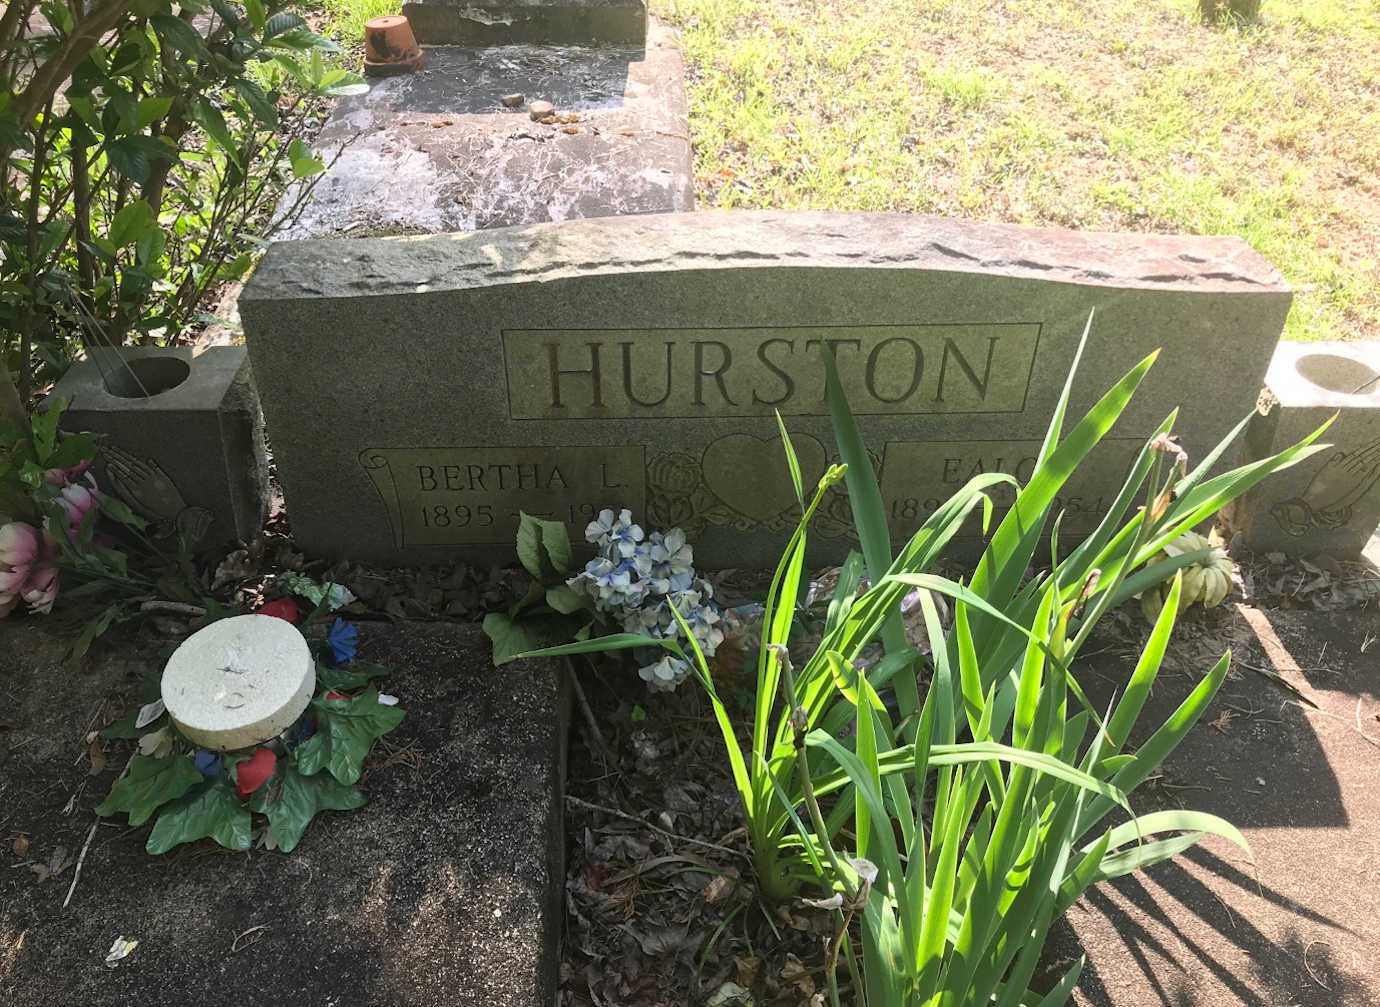 While visiting Zora Neale Hurston's hometown of Notasulga as part of the *Literary Legacies* faculty workshops, participants visited some of Hurston's relatives' gravesites.  Image courtesy of Tuskegee University.